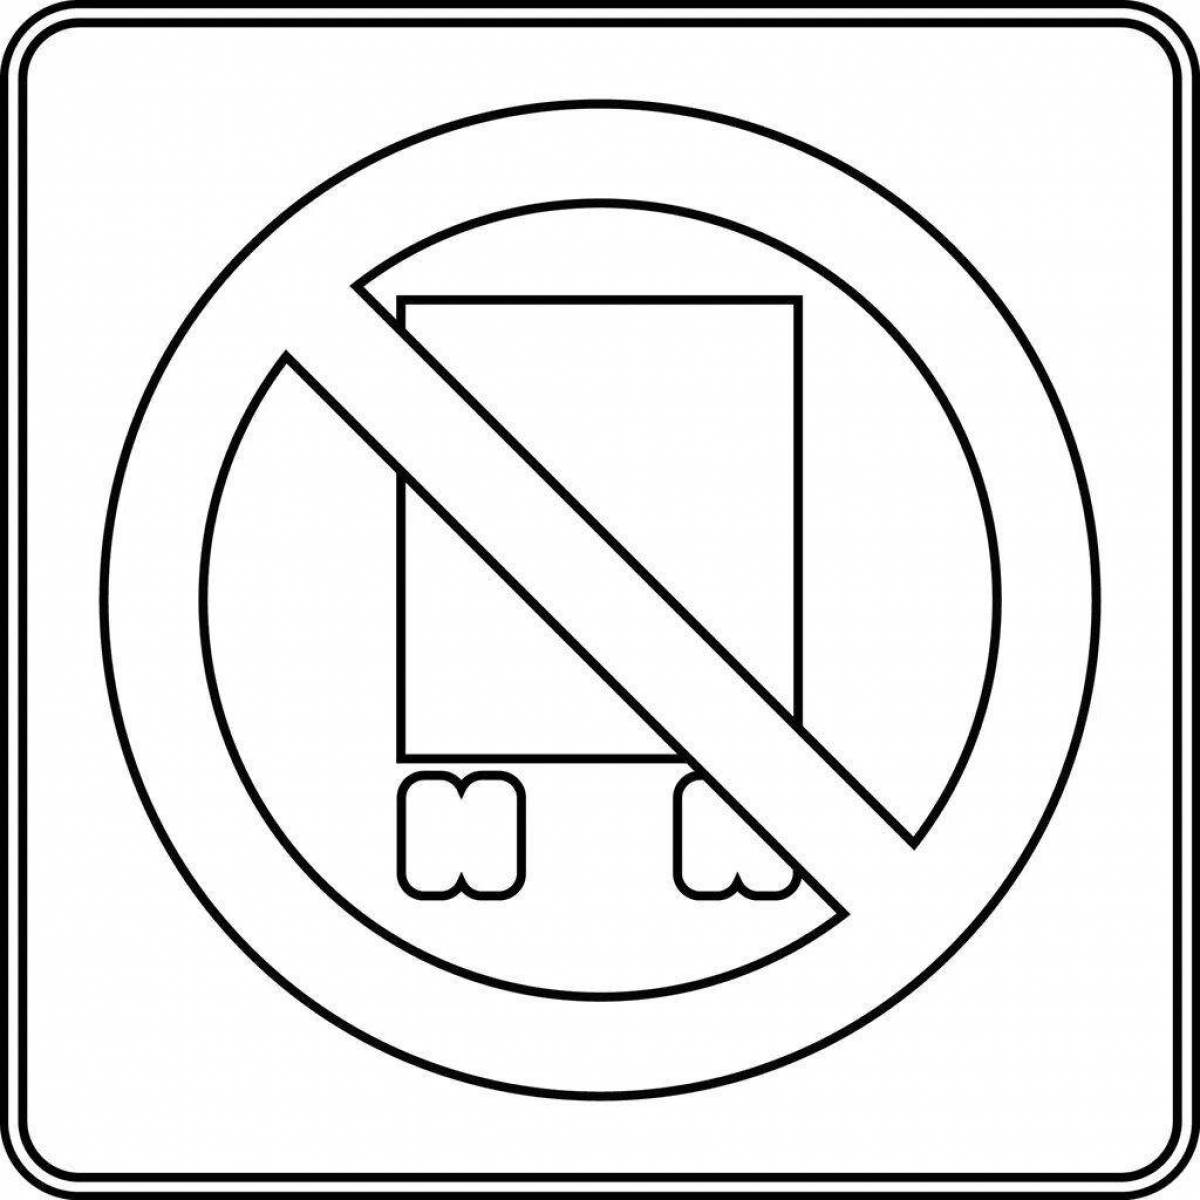 Joy horn prohibited road sign coloring book